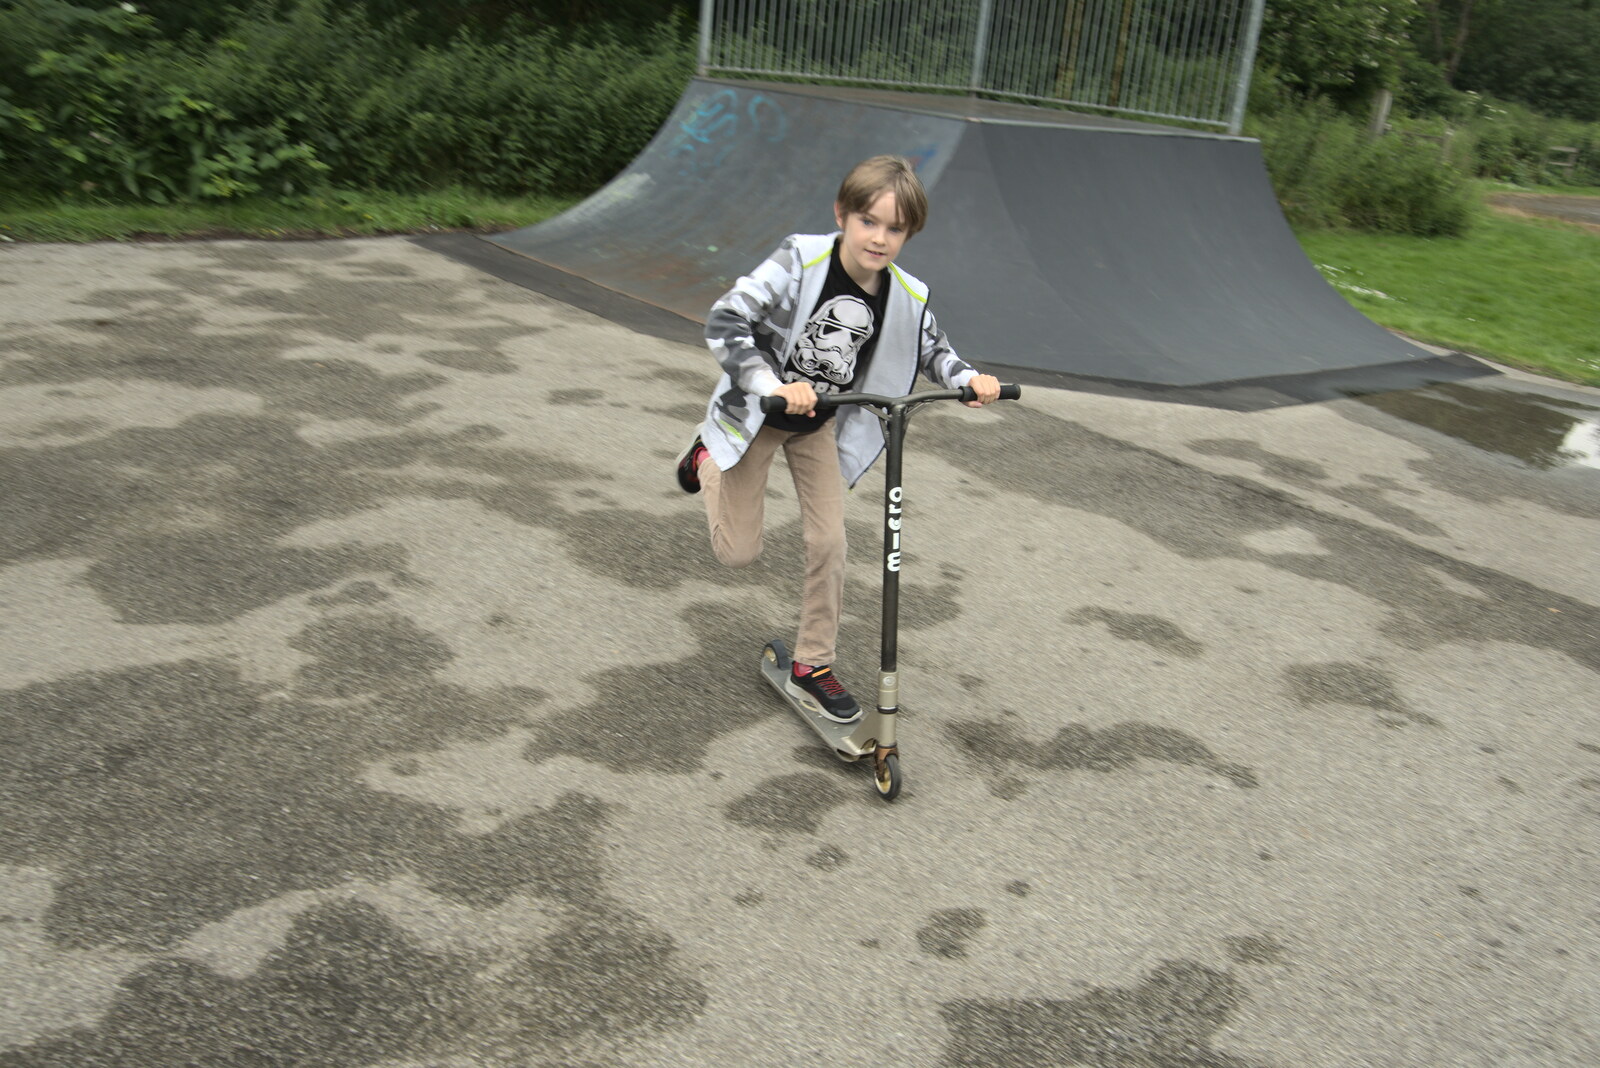 Harry in action from New Kittens, and The Skate Park, Town Moors, Eye, Suffolk - 3rd July 2021